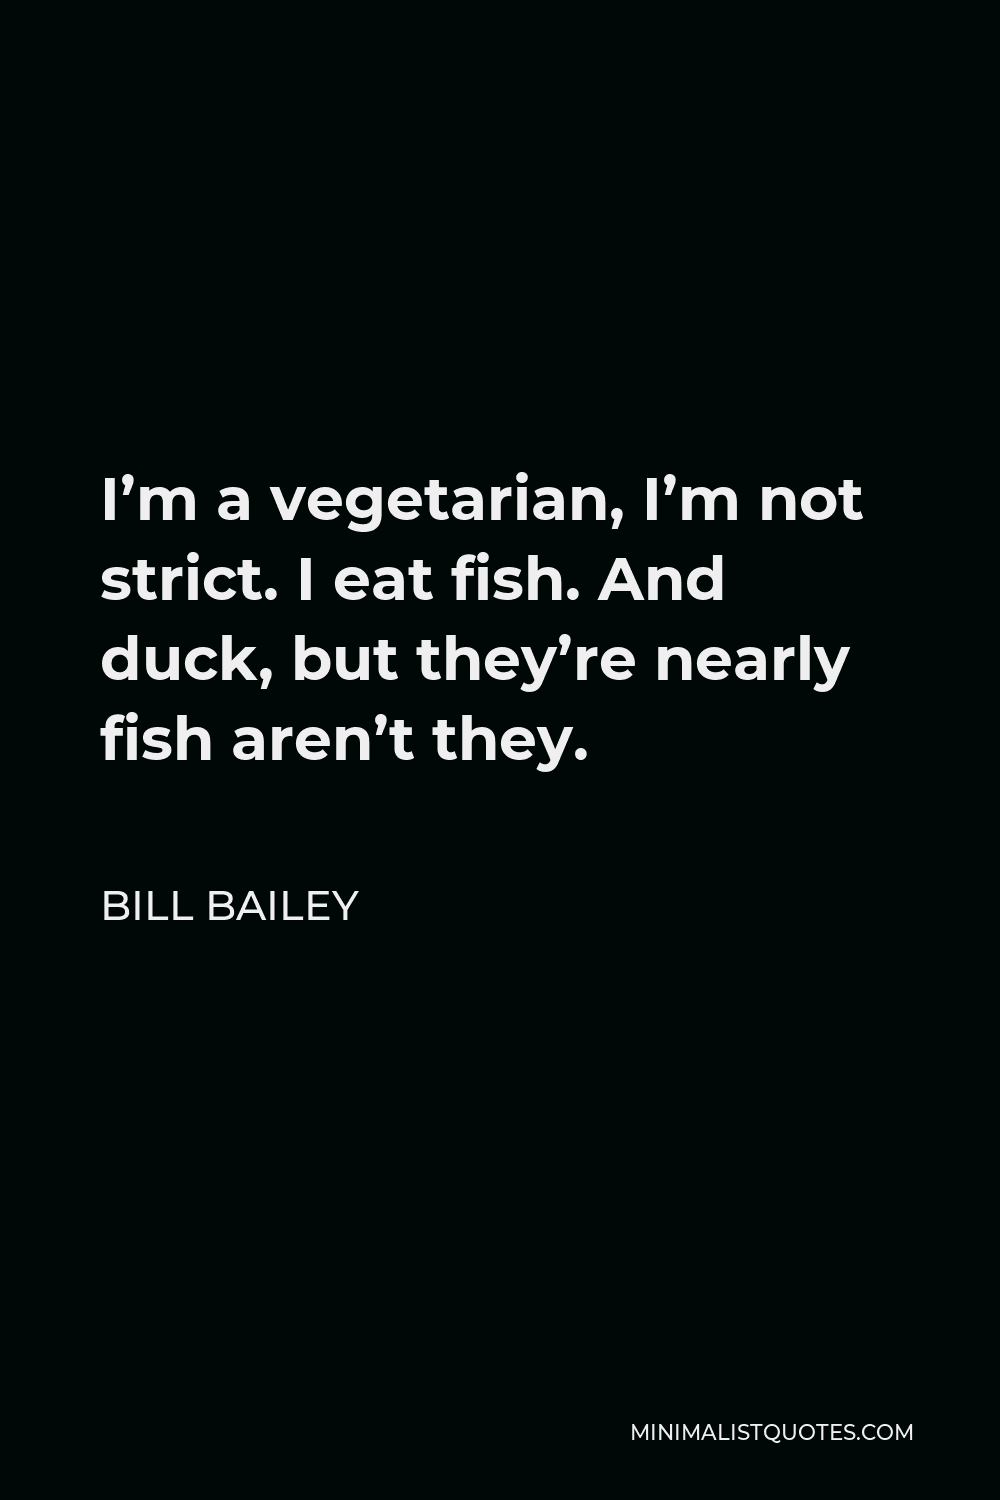 Bill Bailey Quote - I’m a vegetarian, I’m not strict. I eat fish. And duck, but they’re nearly fish aren’t they.